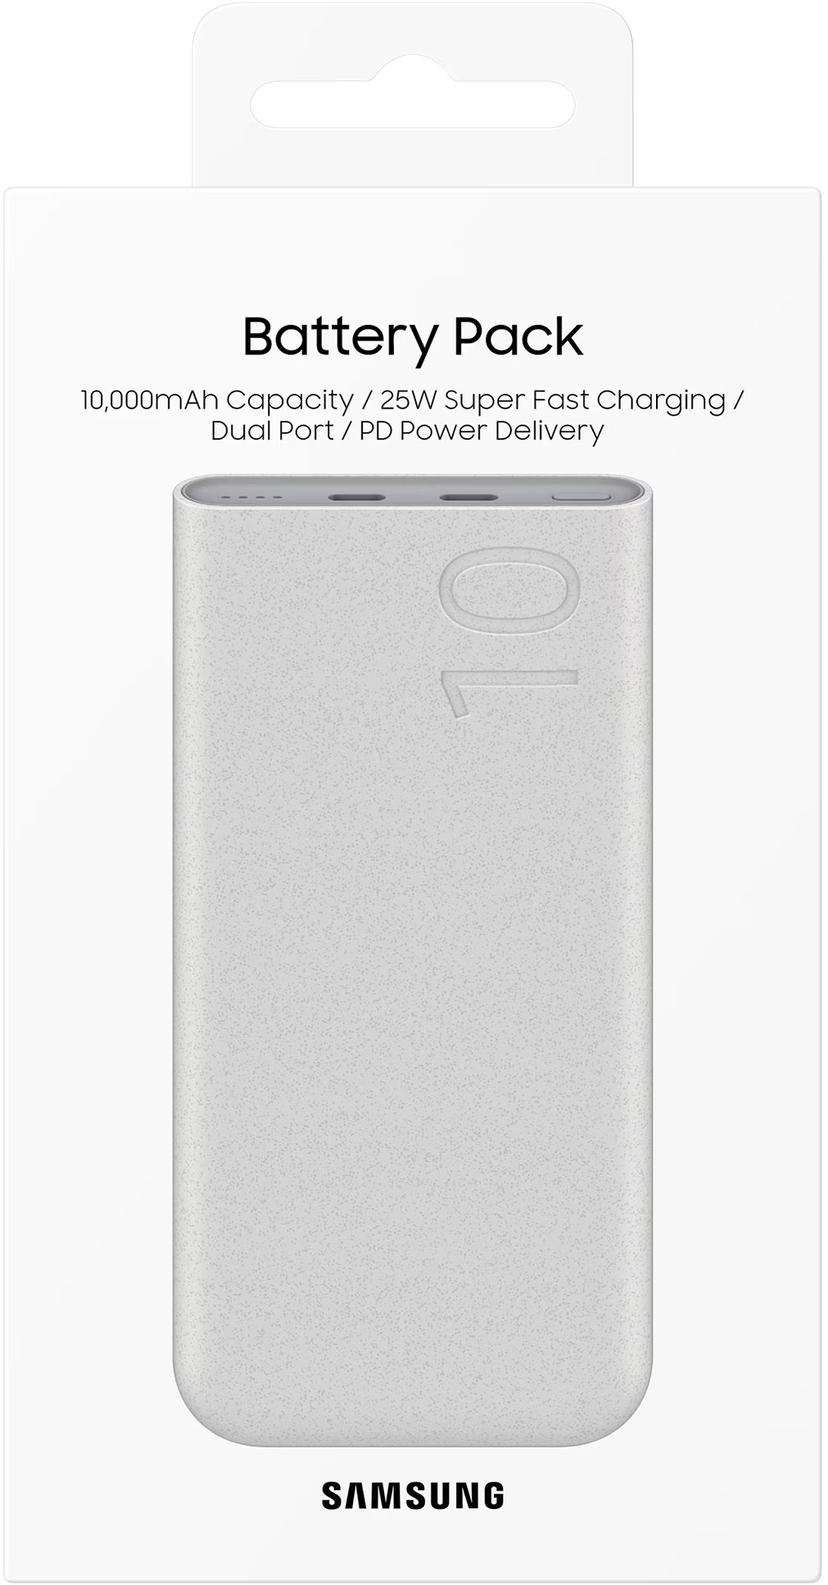 Samsung Portable Battery Pack 10000milliampere hour 2.77A Beige